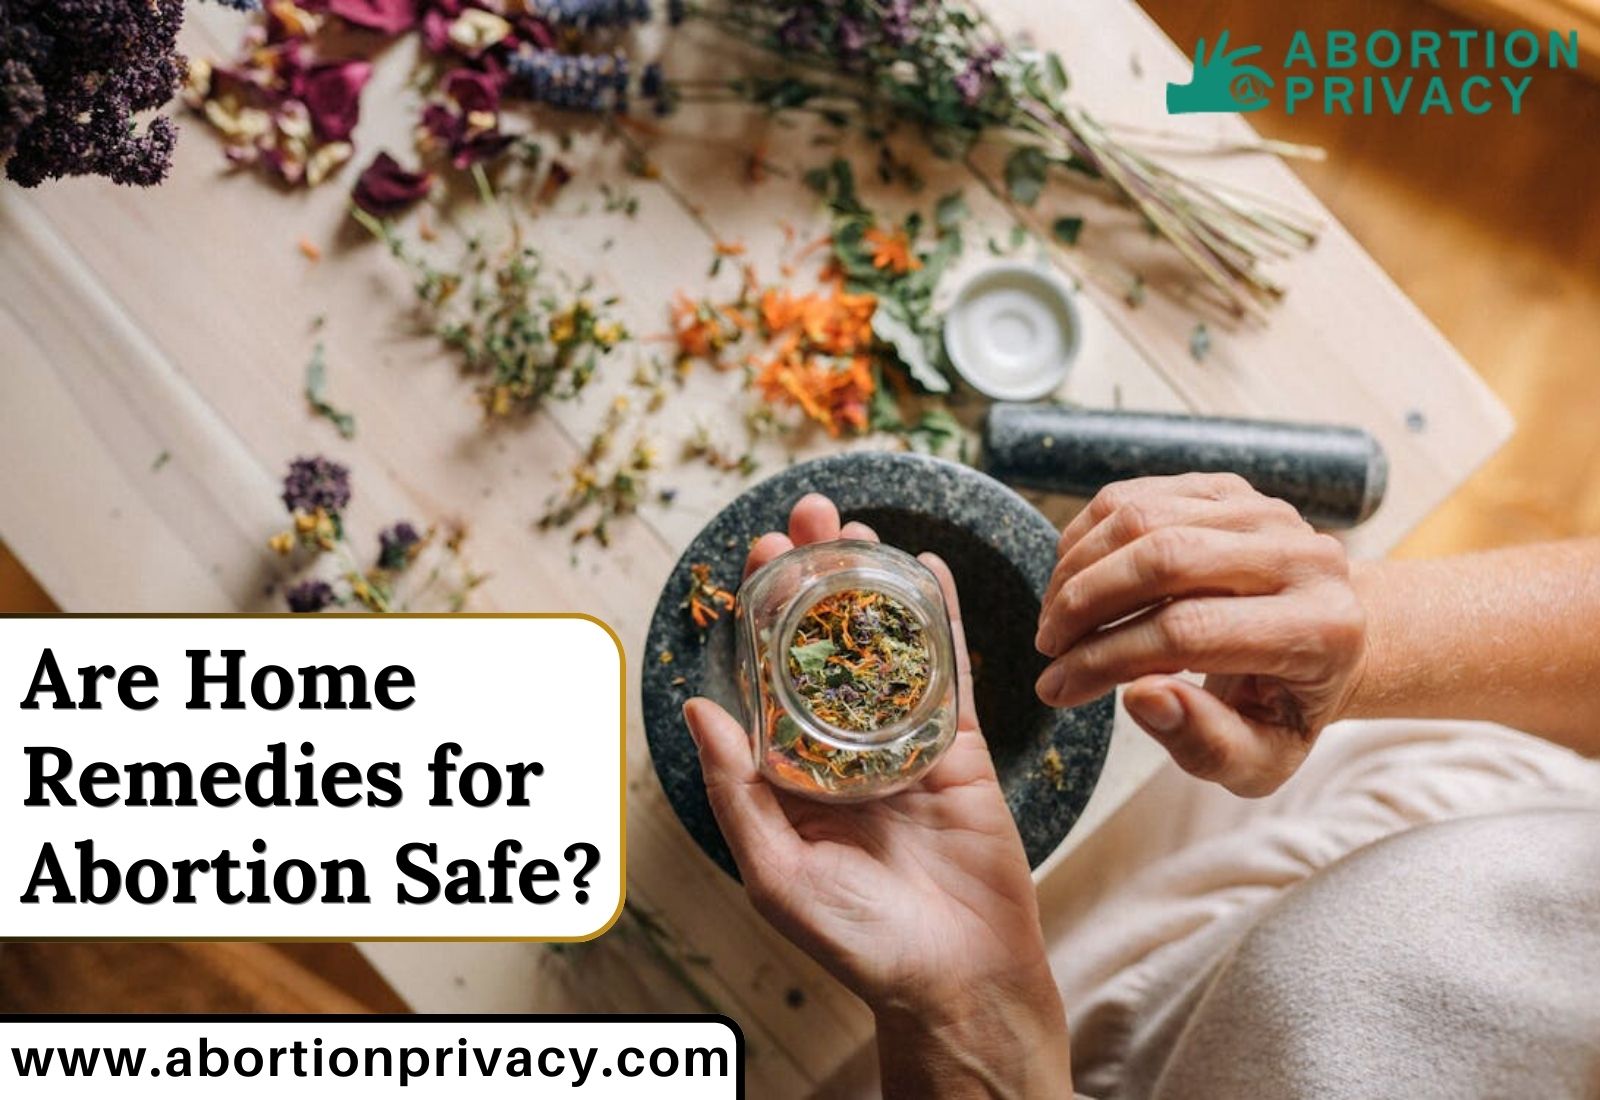 Are Home Remedies for Abortion Safe? – Safe Medical Abortion